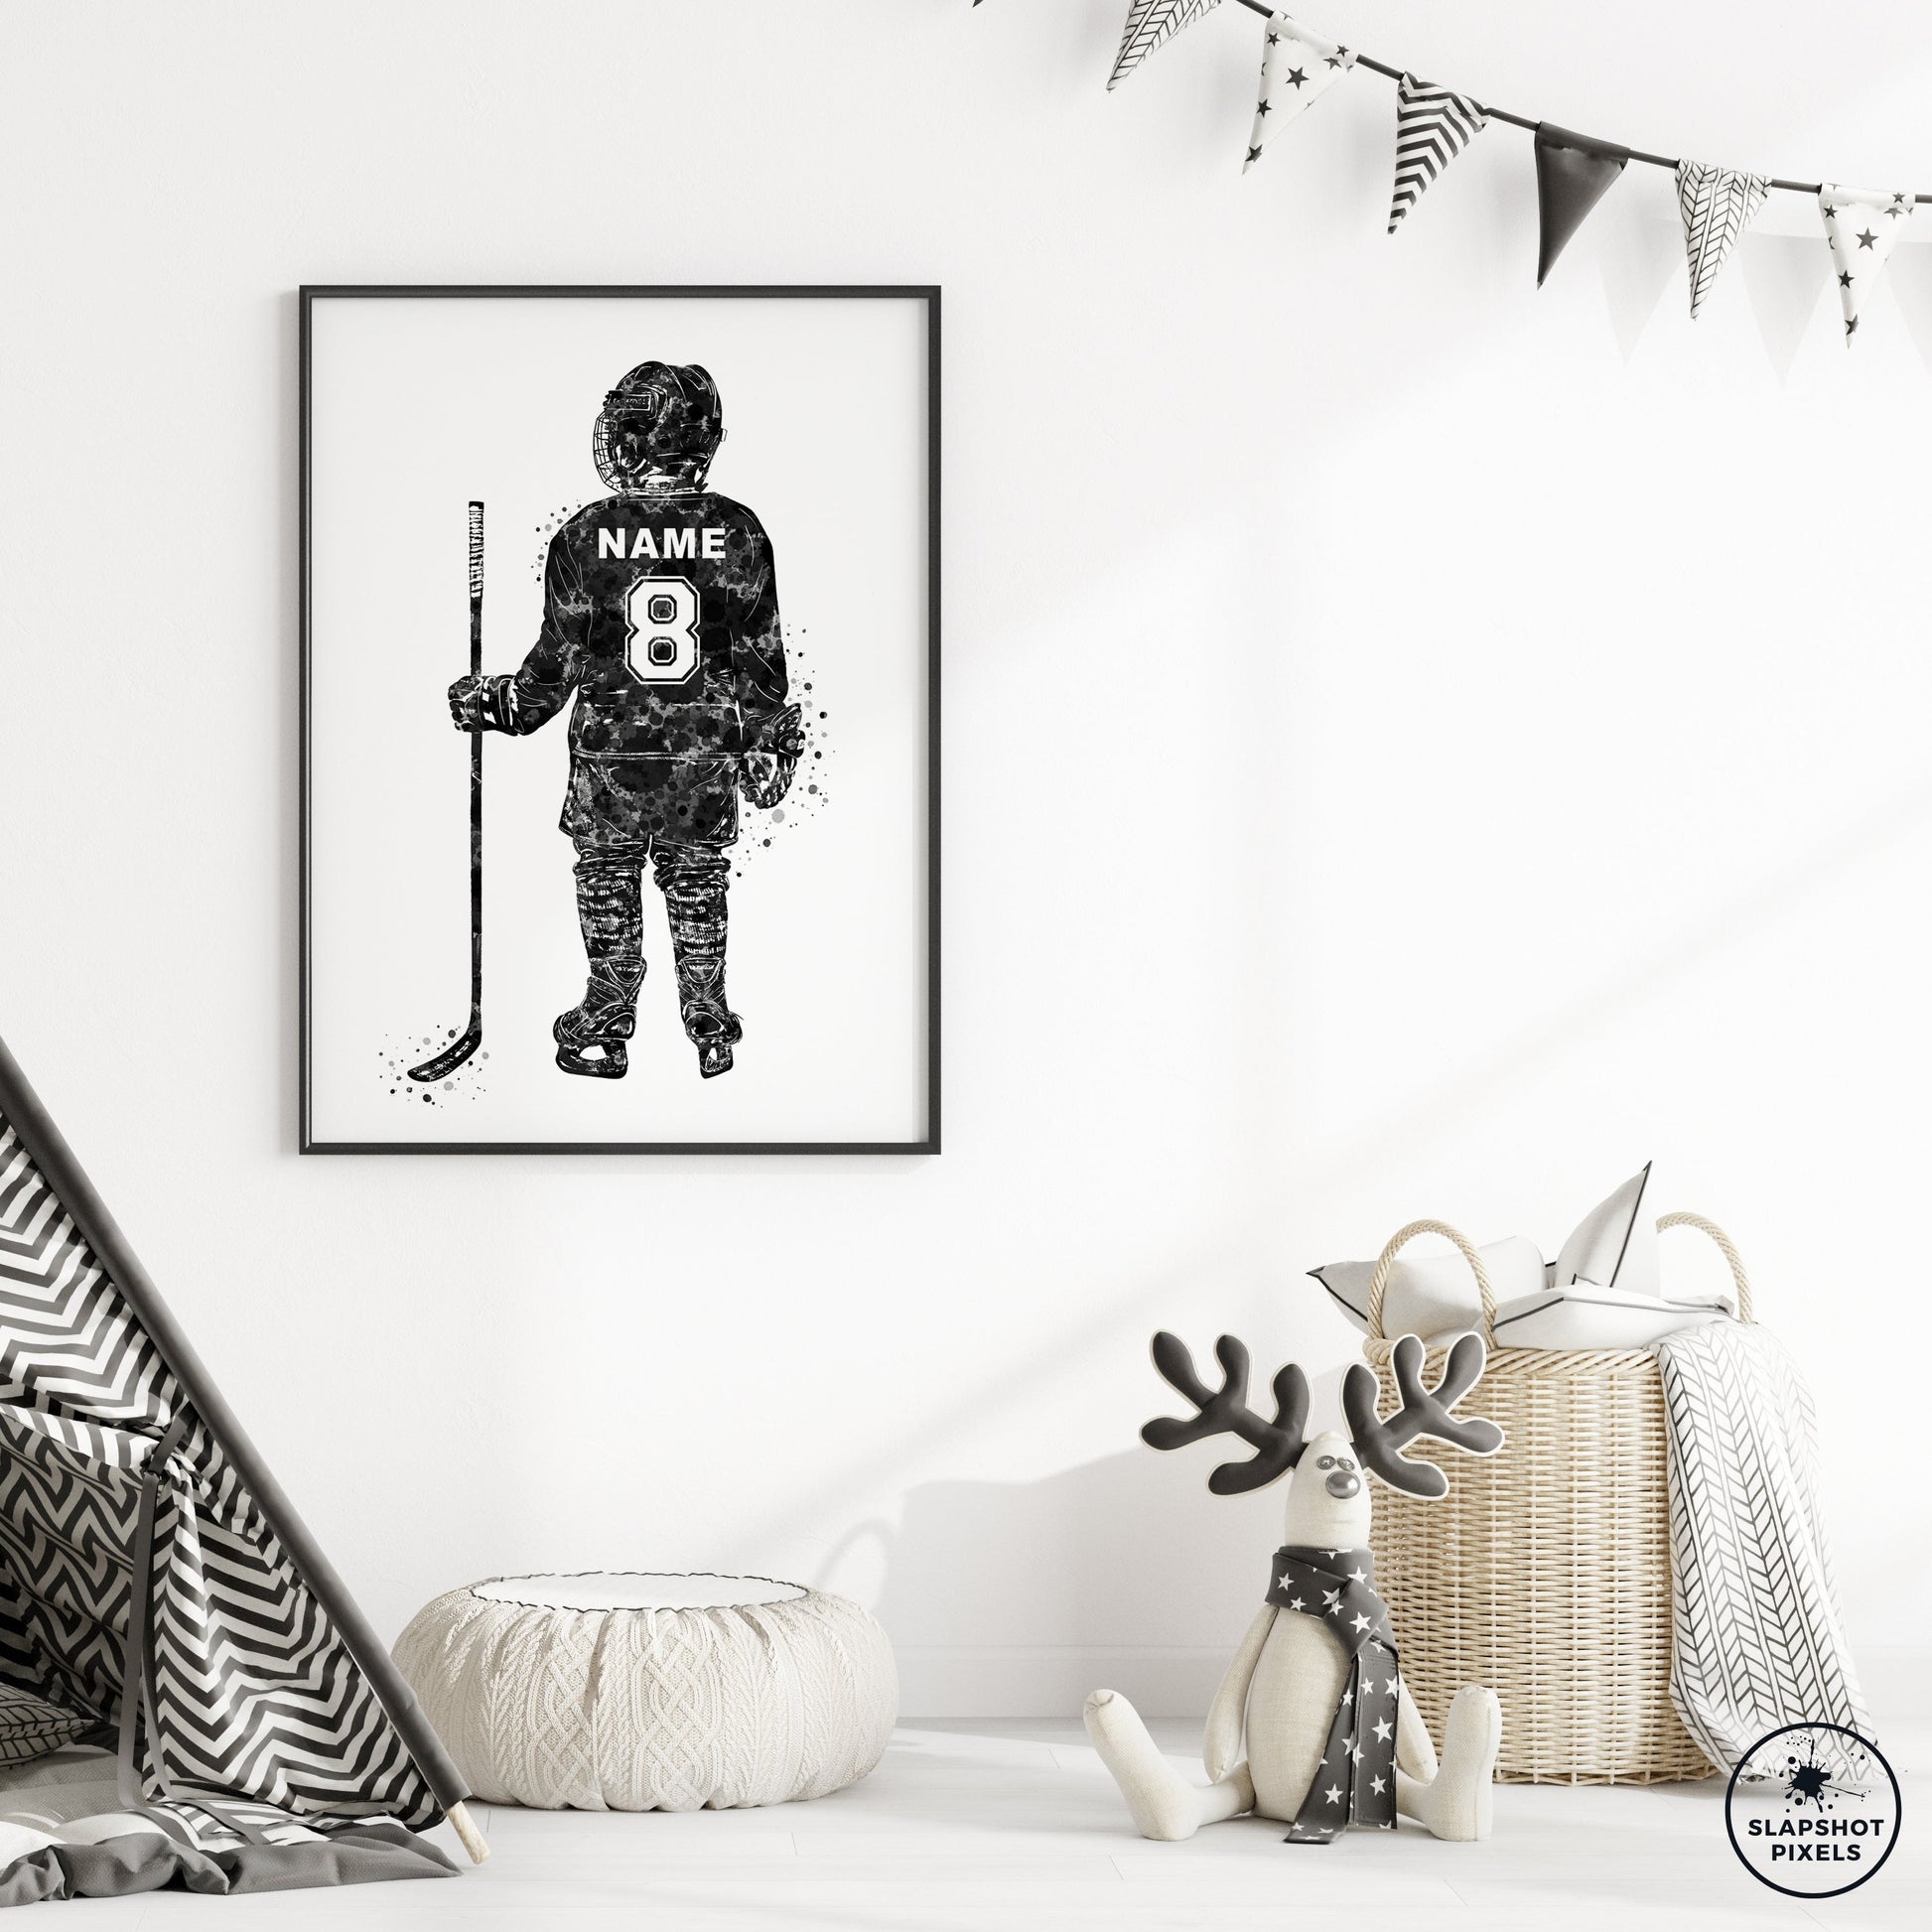 Personalized hockey poster showing back of little boy hockey player with custom name and number on the hockey jersey. Designed in watercolor splatters. Perfect hockey gifts for boys, hockey team gifts, hockey coach gift, hockey wall art décor in a hockey bedroom and birthday gifts for hockey players.